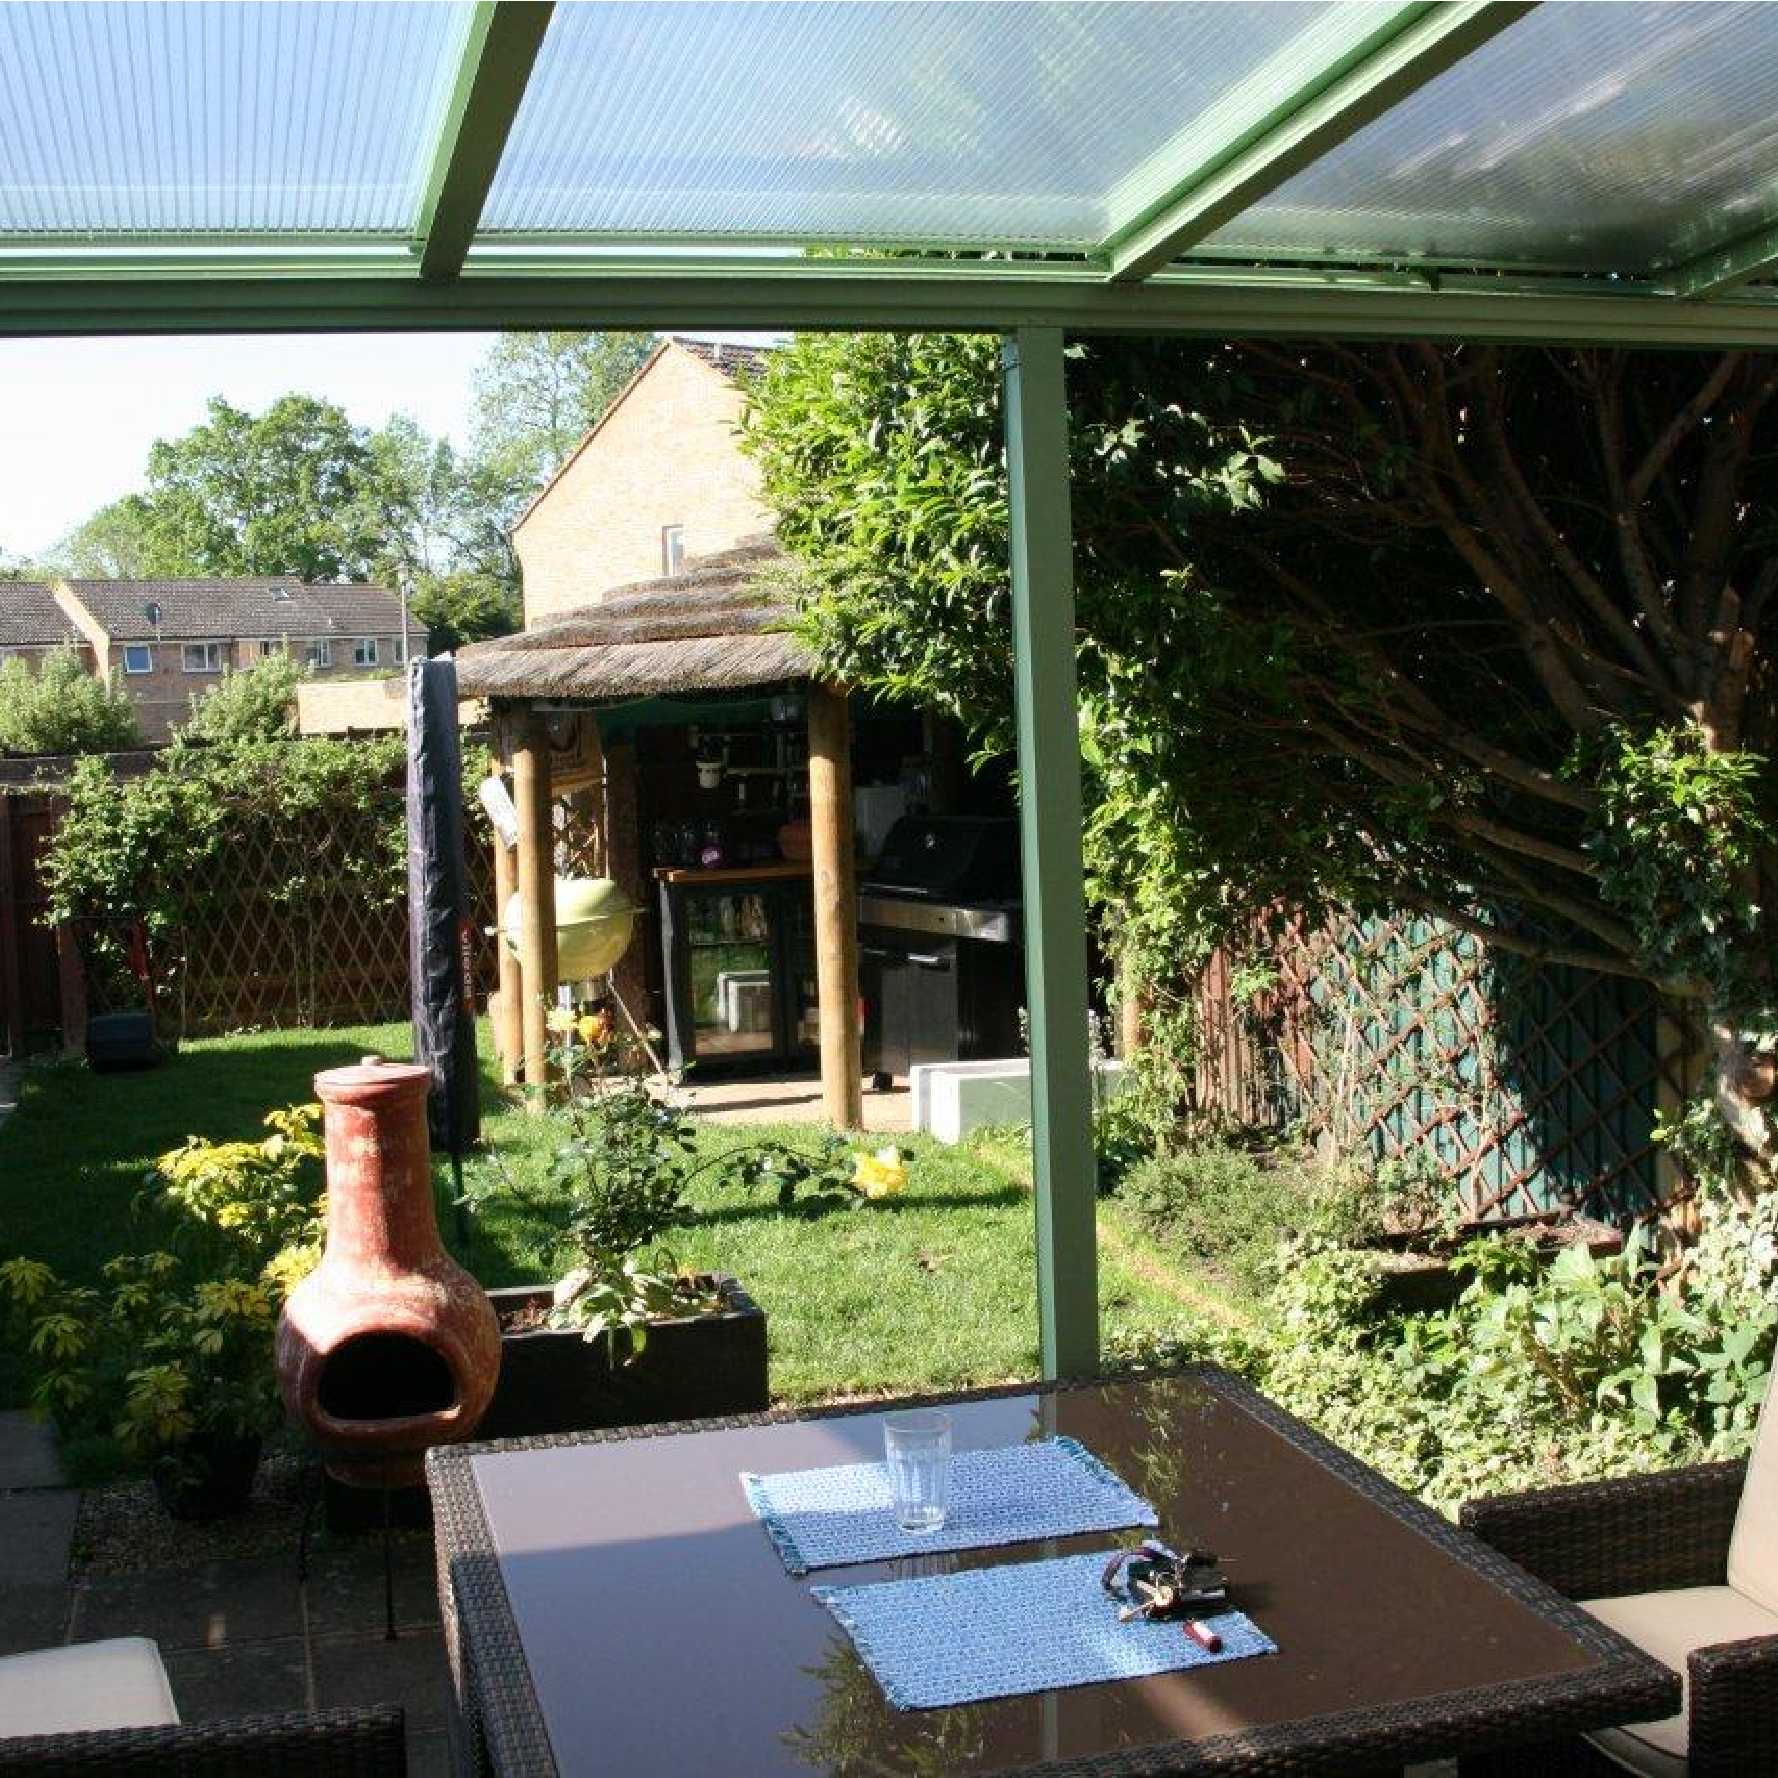 Affordable Omega Smart Lean-To Canopy, White with 16mm Polycarbonate Glazing - 6.0m (W) x 3.0m (P), (3) Supporting Posts